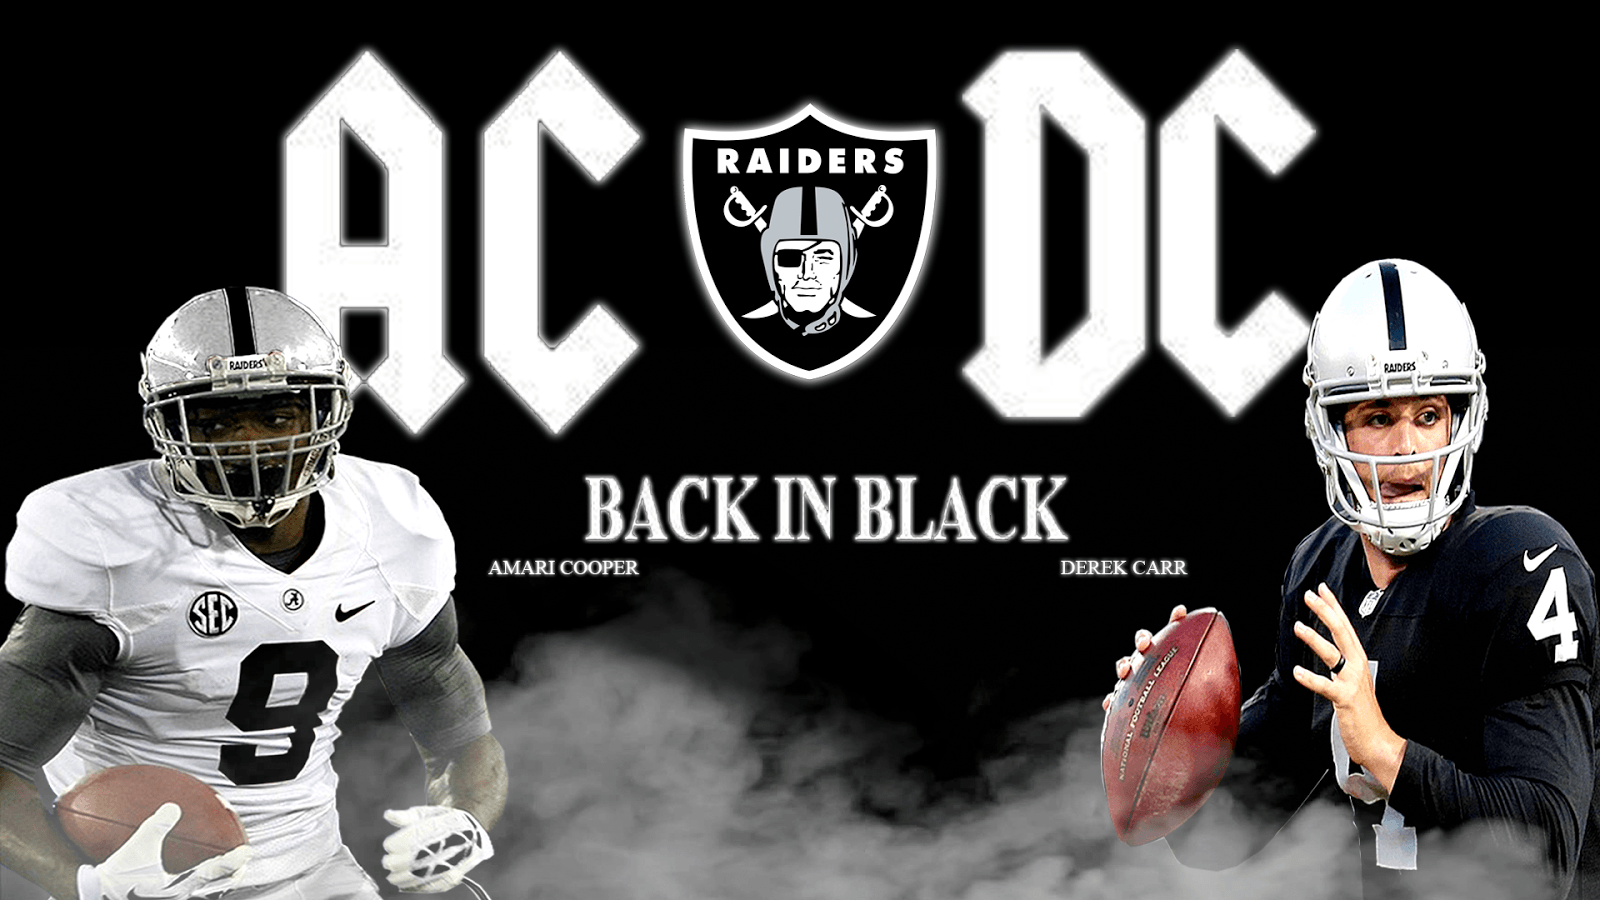 The Fan Blog Of A Oakland Raider And LA Laker Young Blood: AC DC